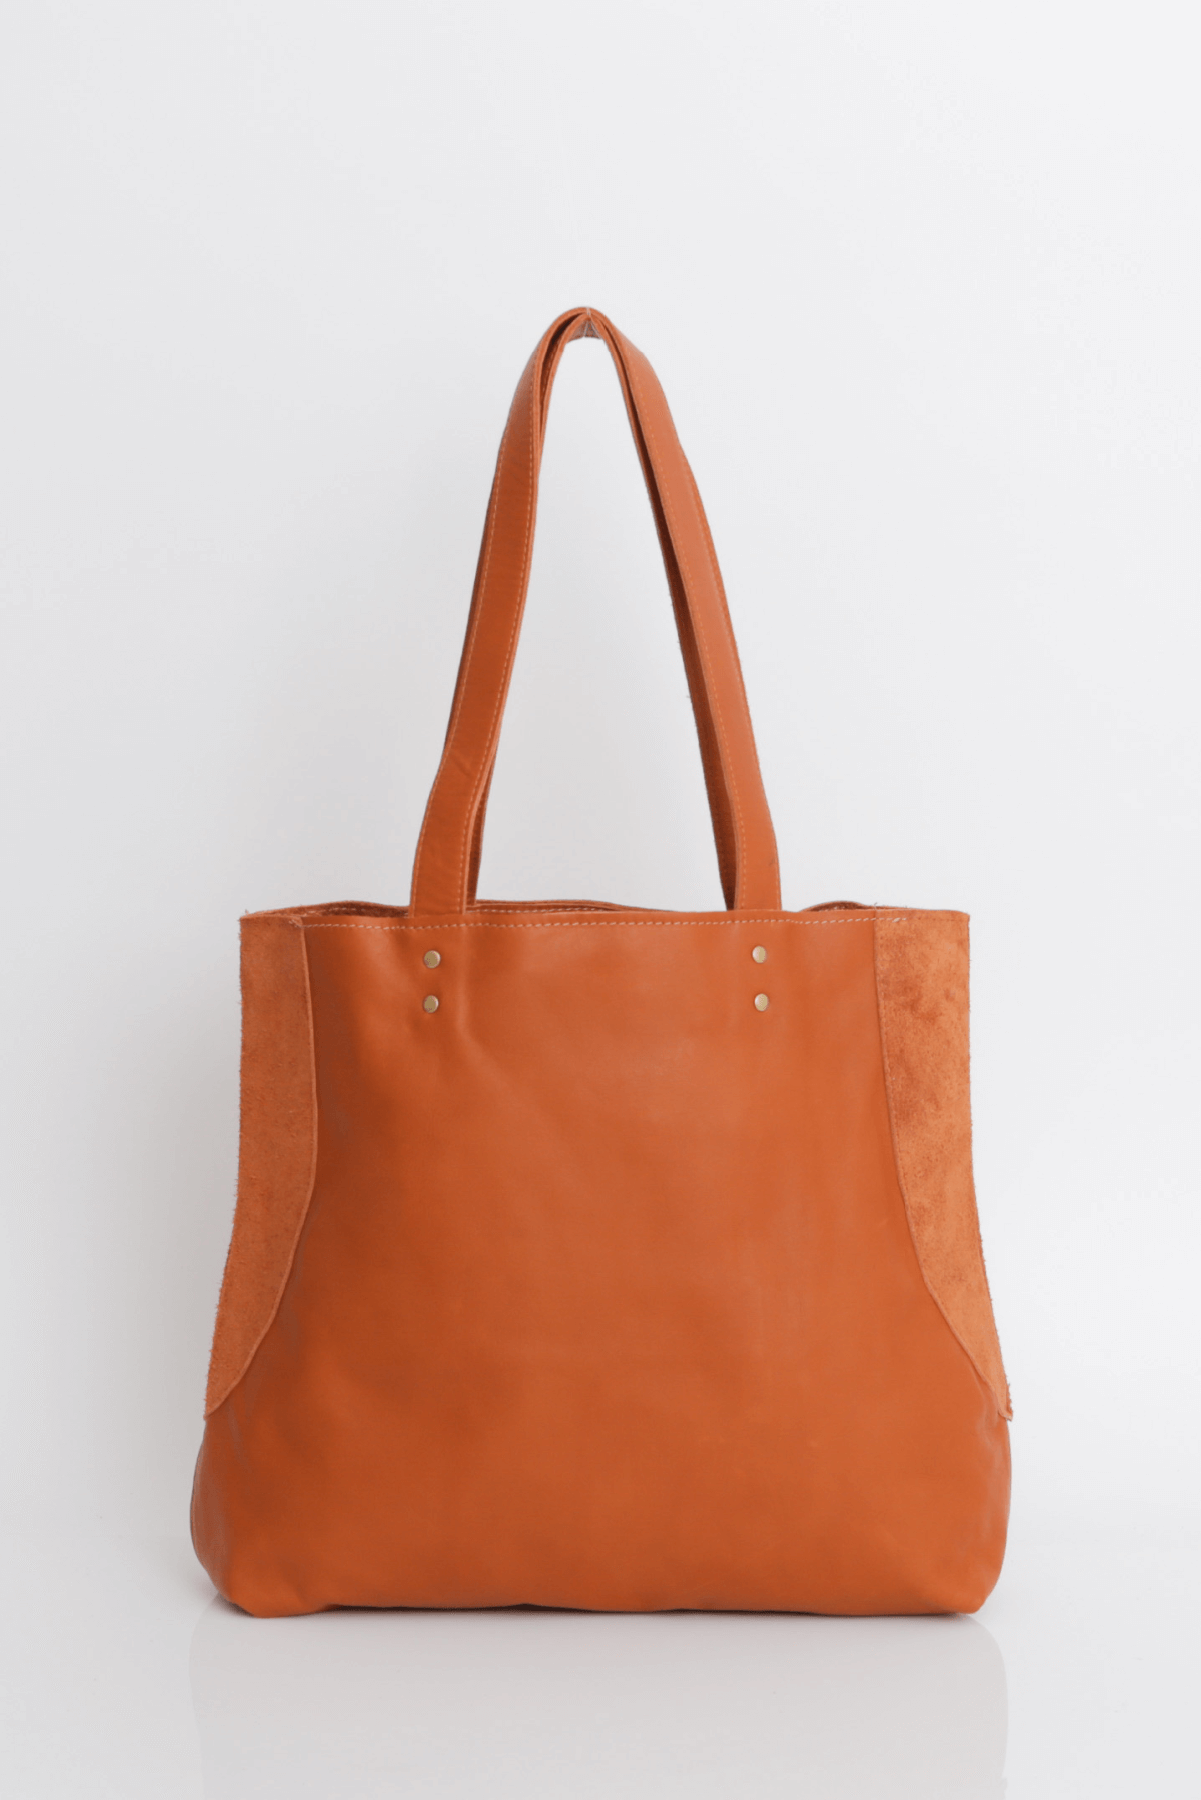 The Best Totes for Work Leather Work Bags for women – MAHI Leather